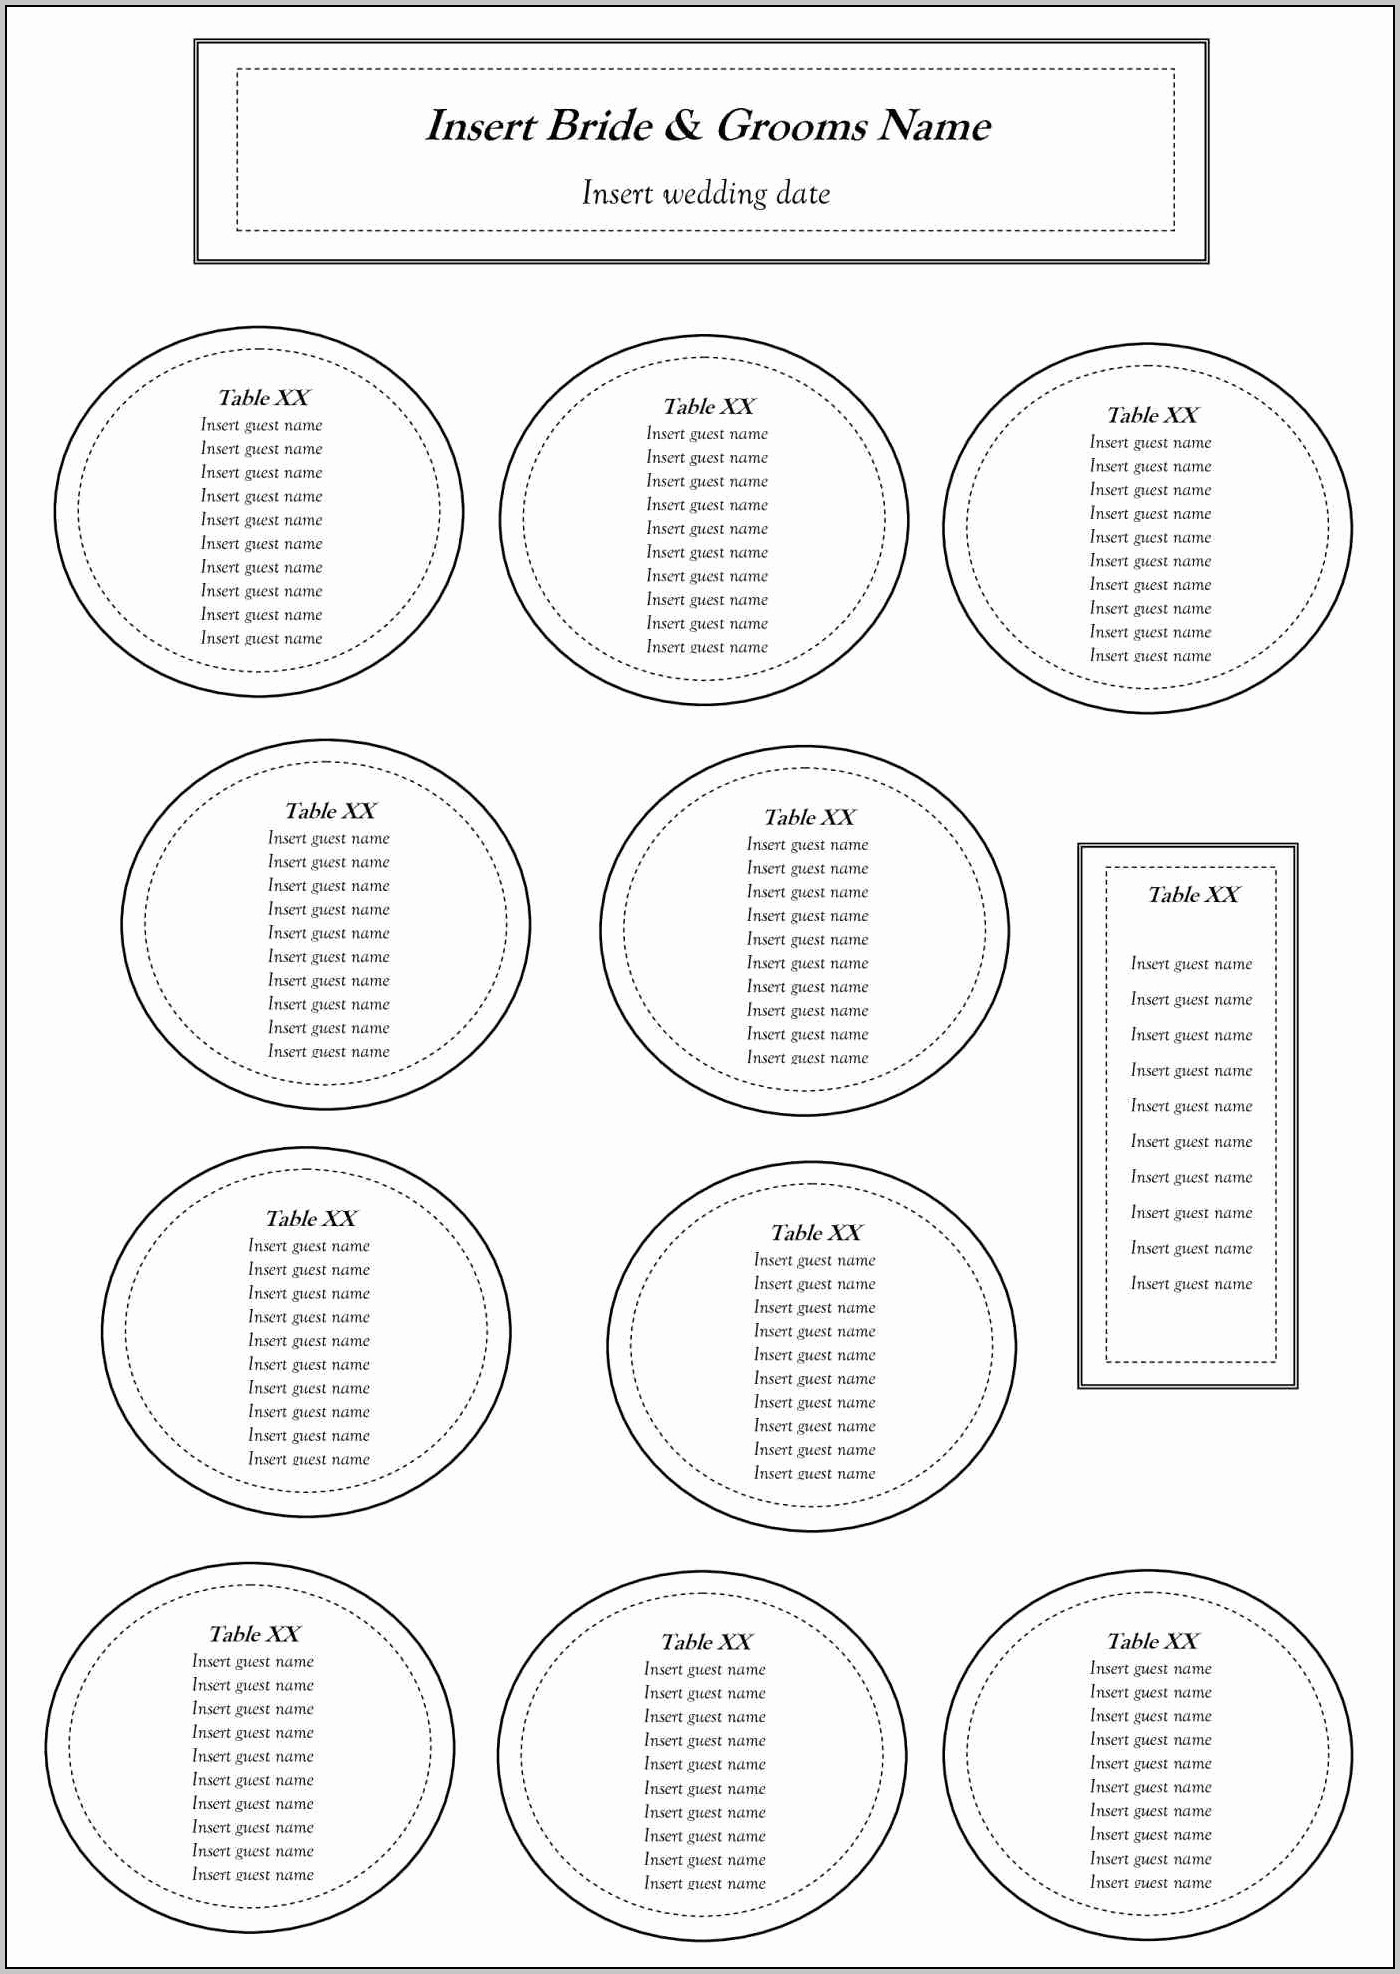 Making A Seating Chart For Wedding